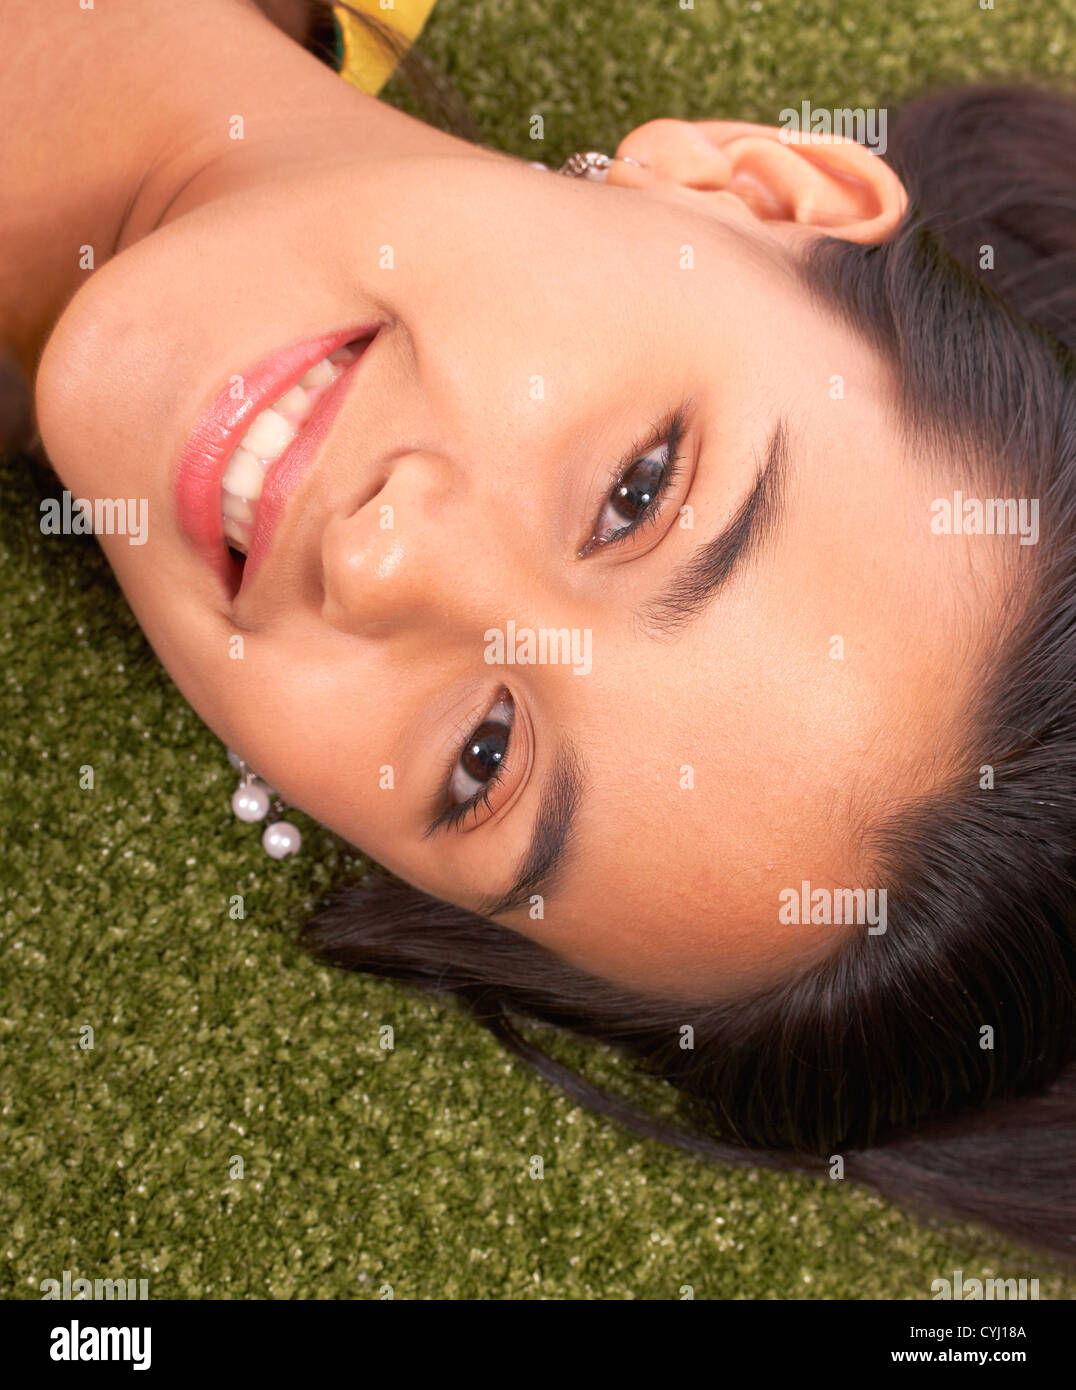 Smiling Girl Relaxed And Contented On The Grass In The Garden Stock Photo